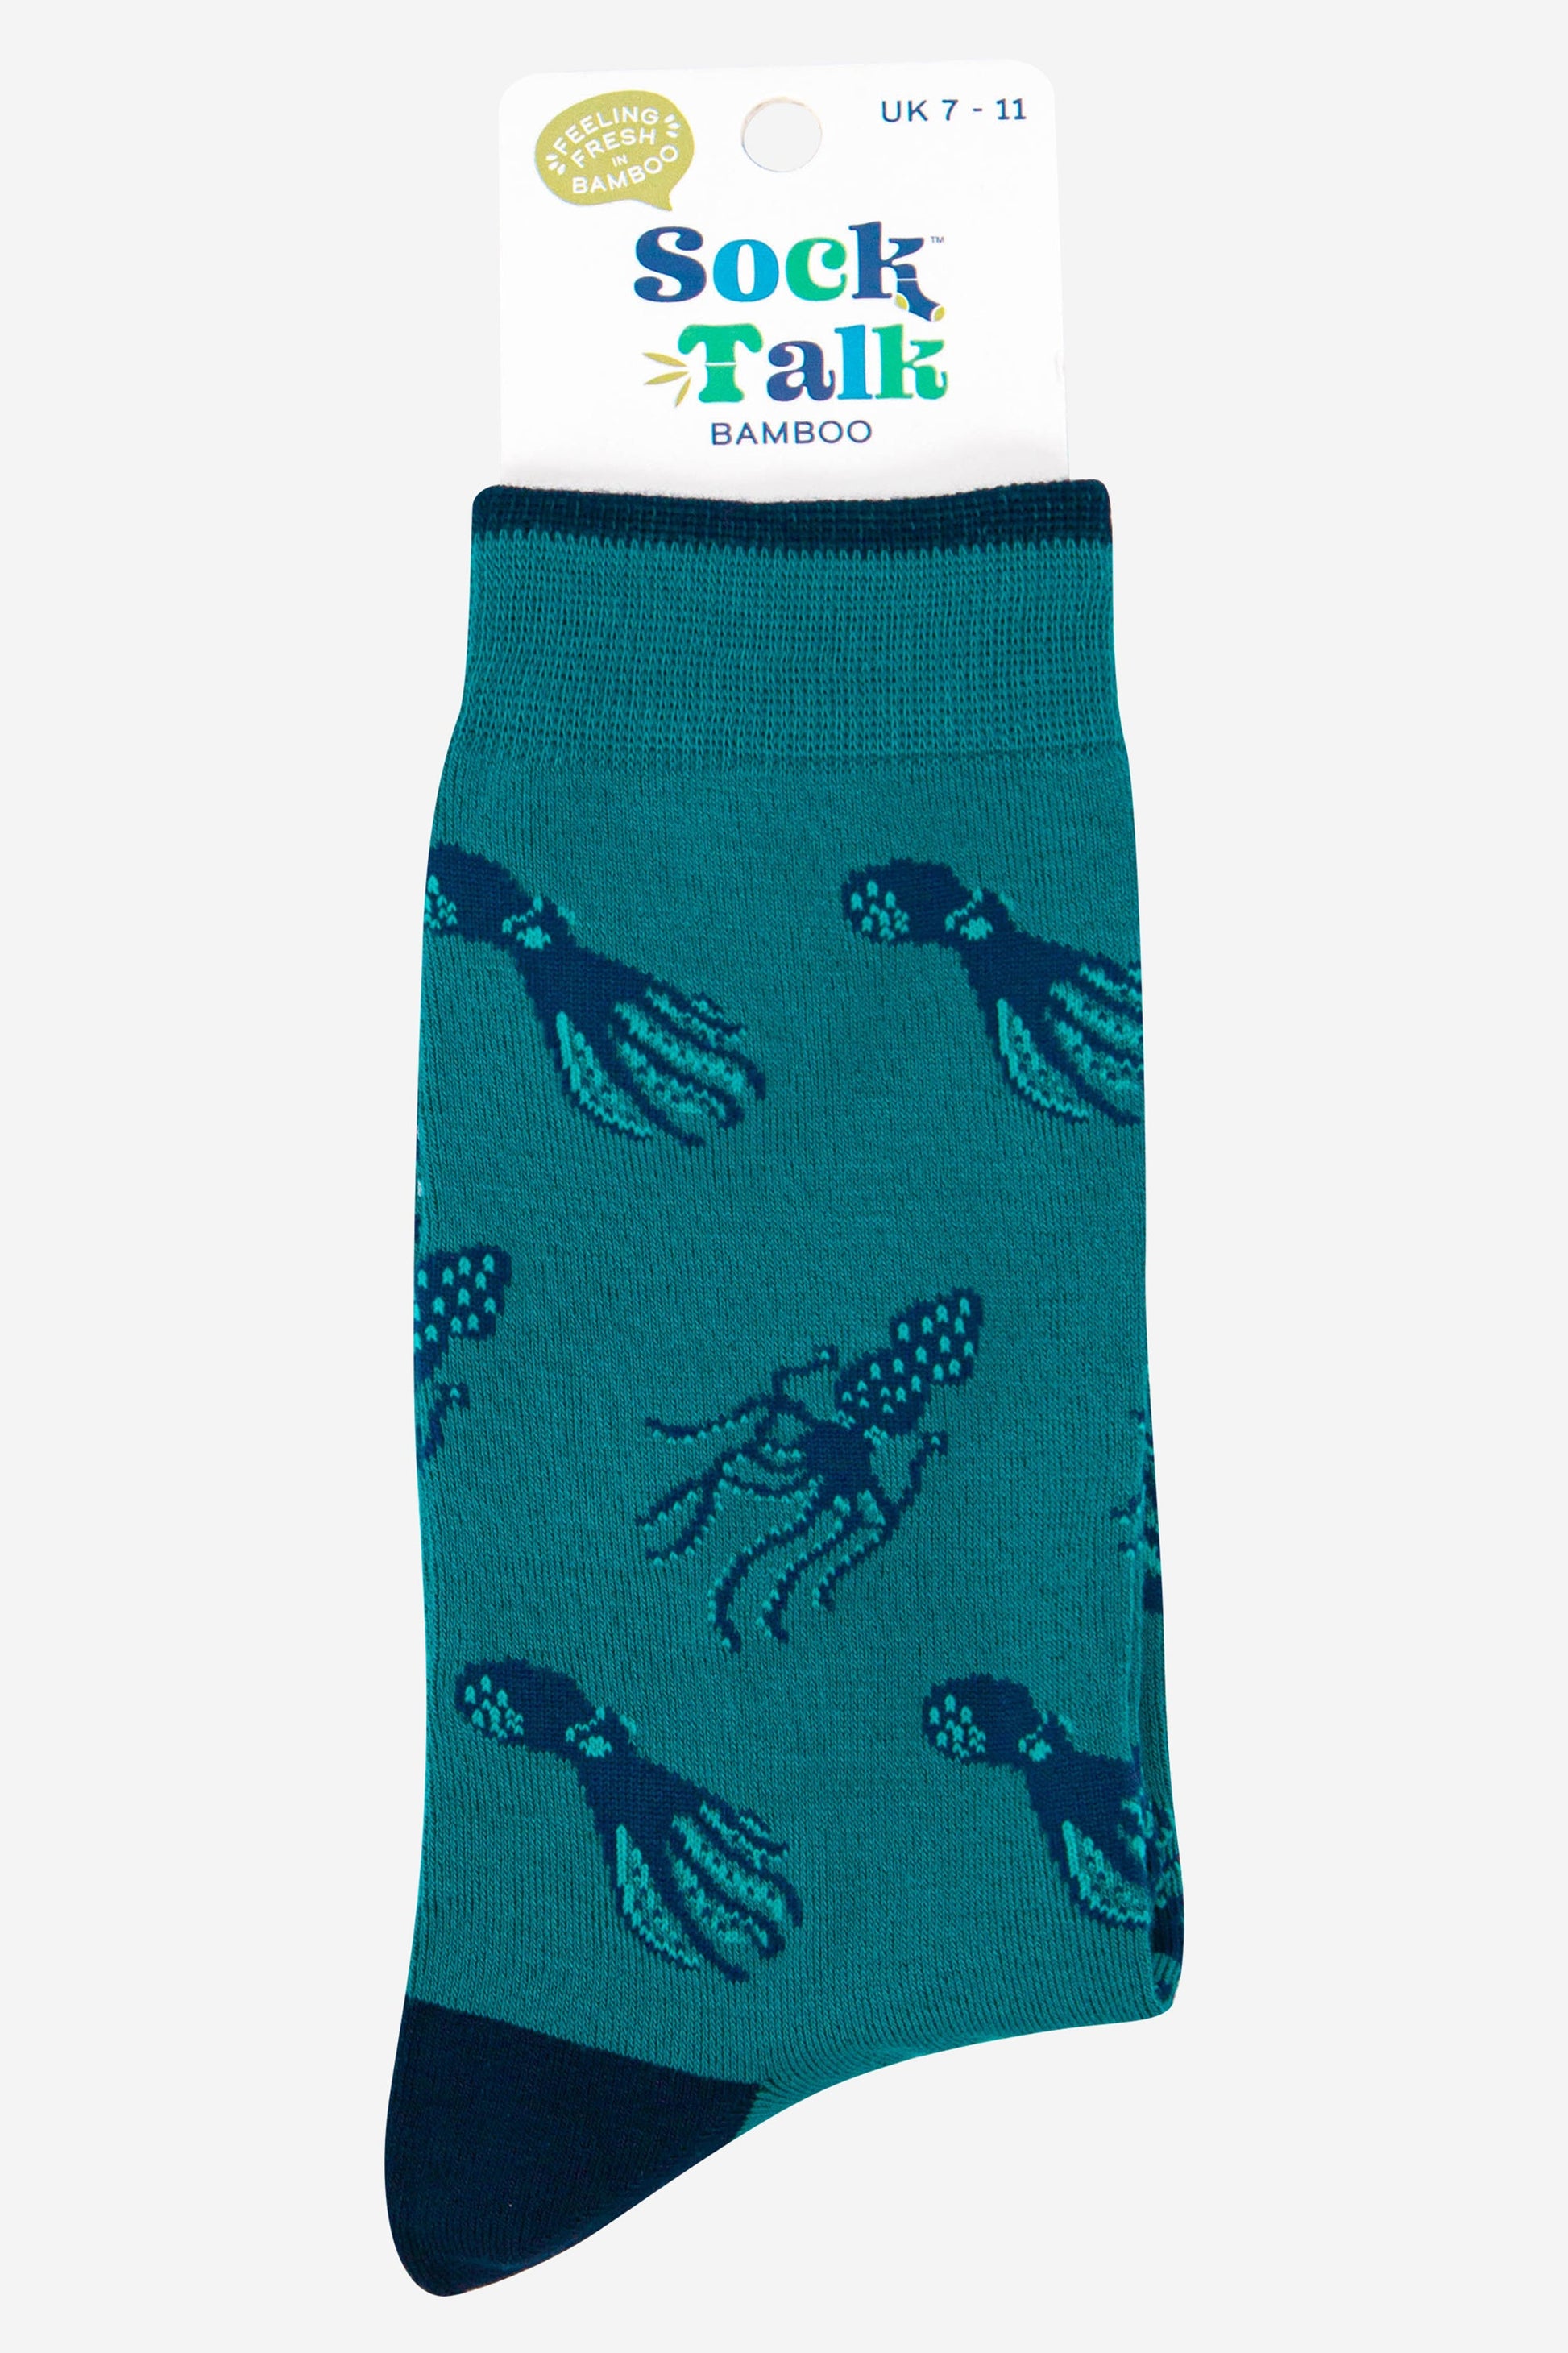 mens squid and octopus bamboo dress socks in teal and navy blue